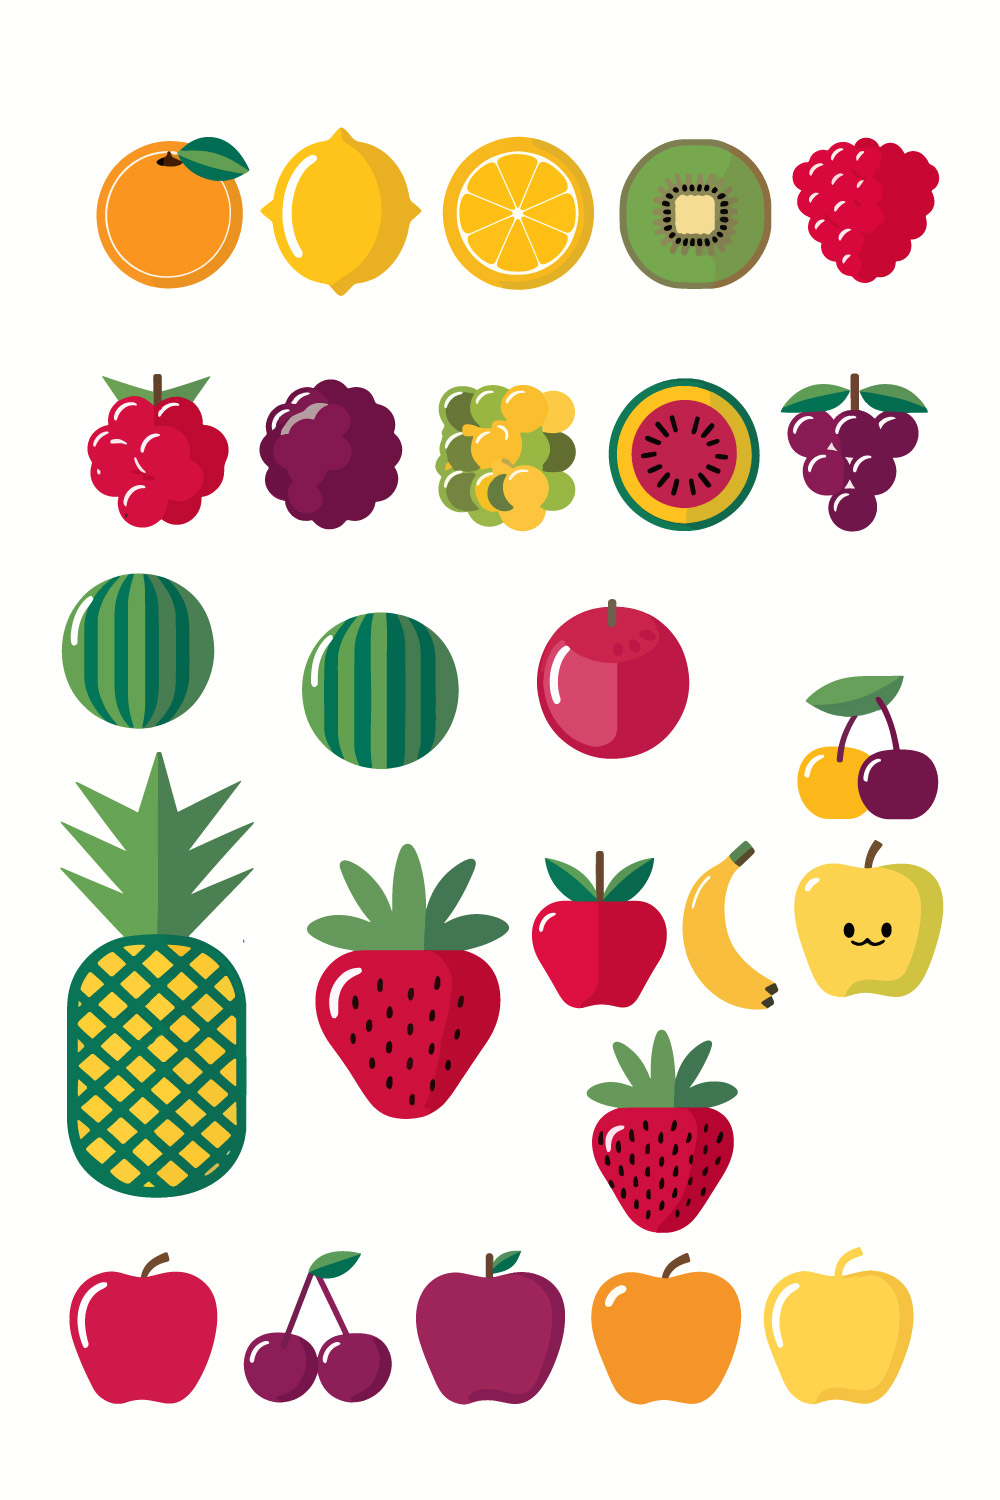 Fruit icons pinterest preview image.